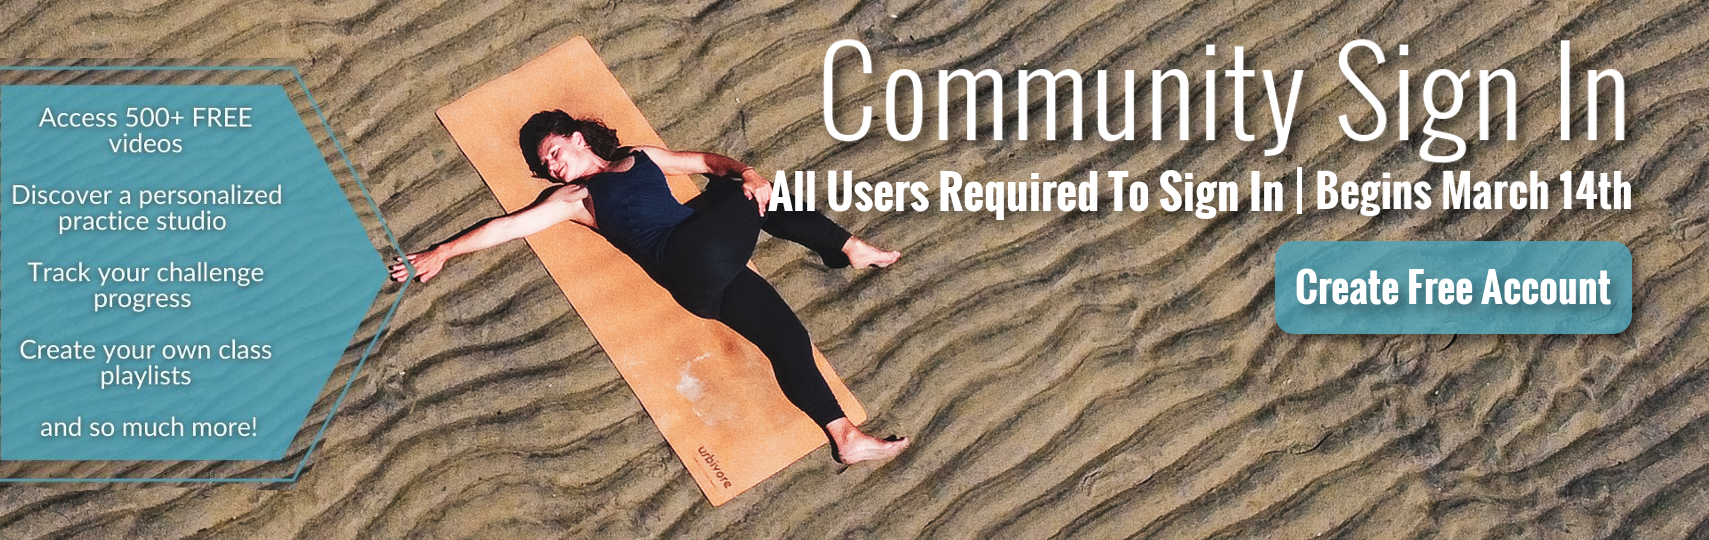 Sign up to access all of our cool new features and connect with our community